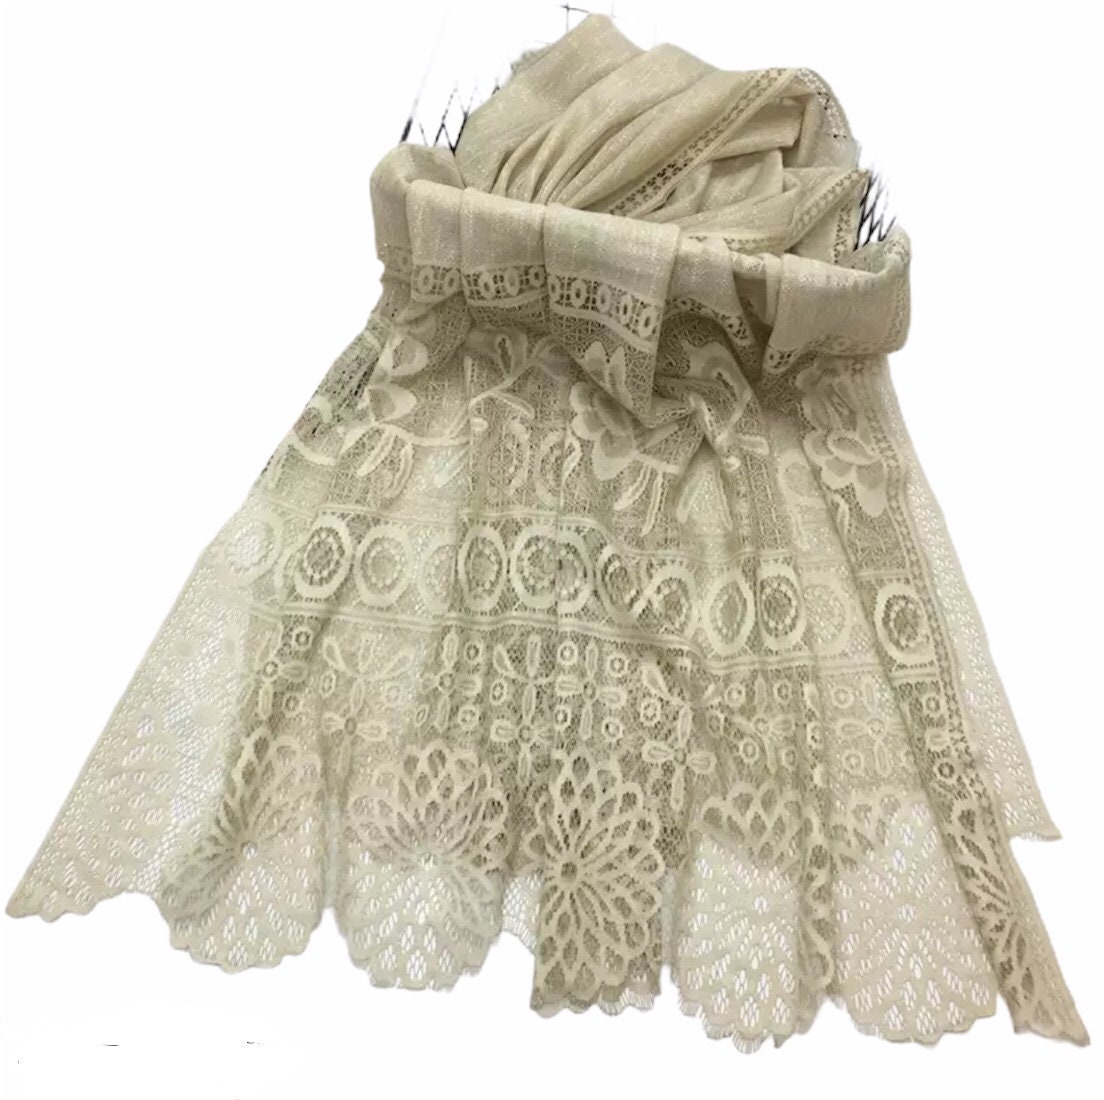 Beige Viscose Blend Lace Edged Scarf Hijab Shawl For Women Comes With A Magnetic Pin As Complimentary